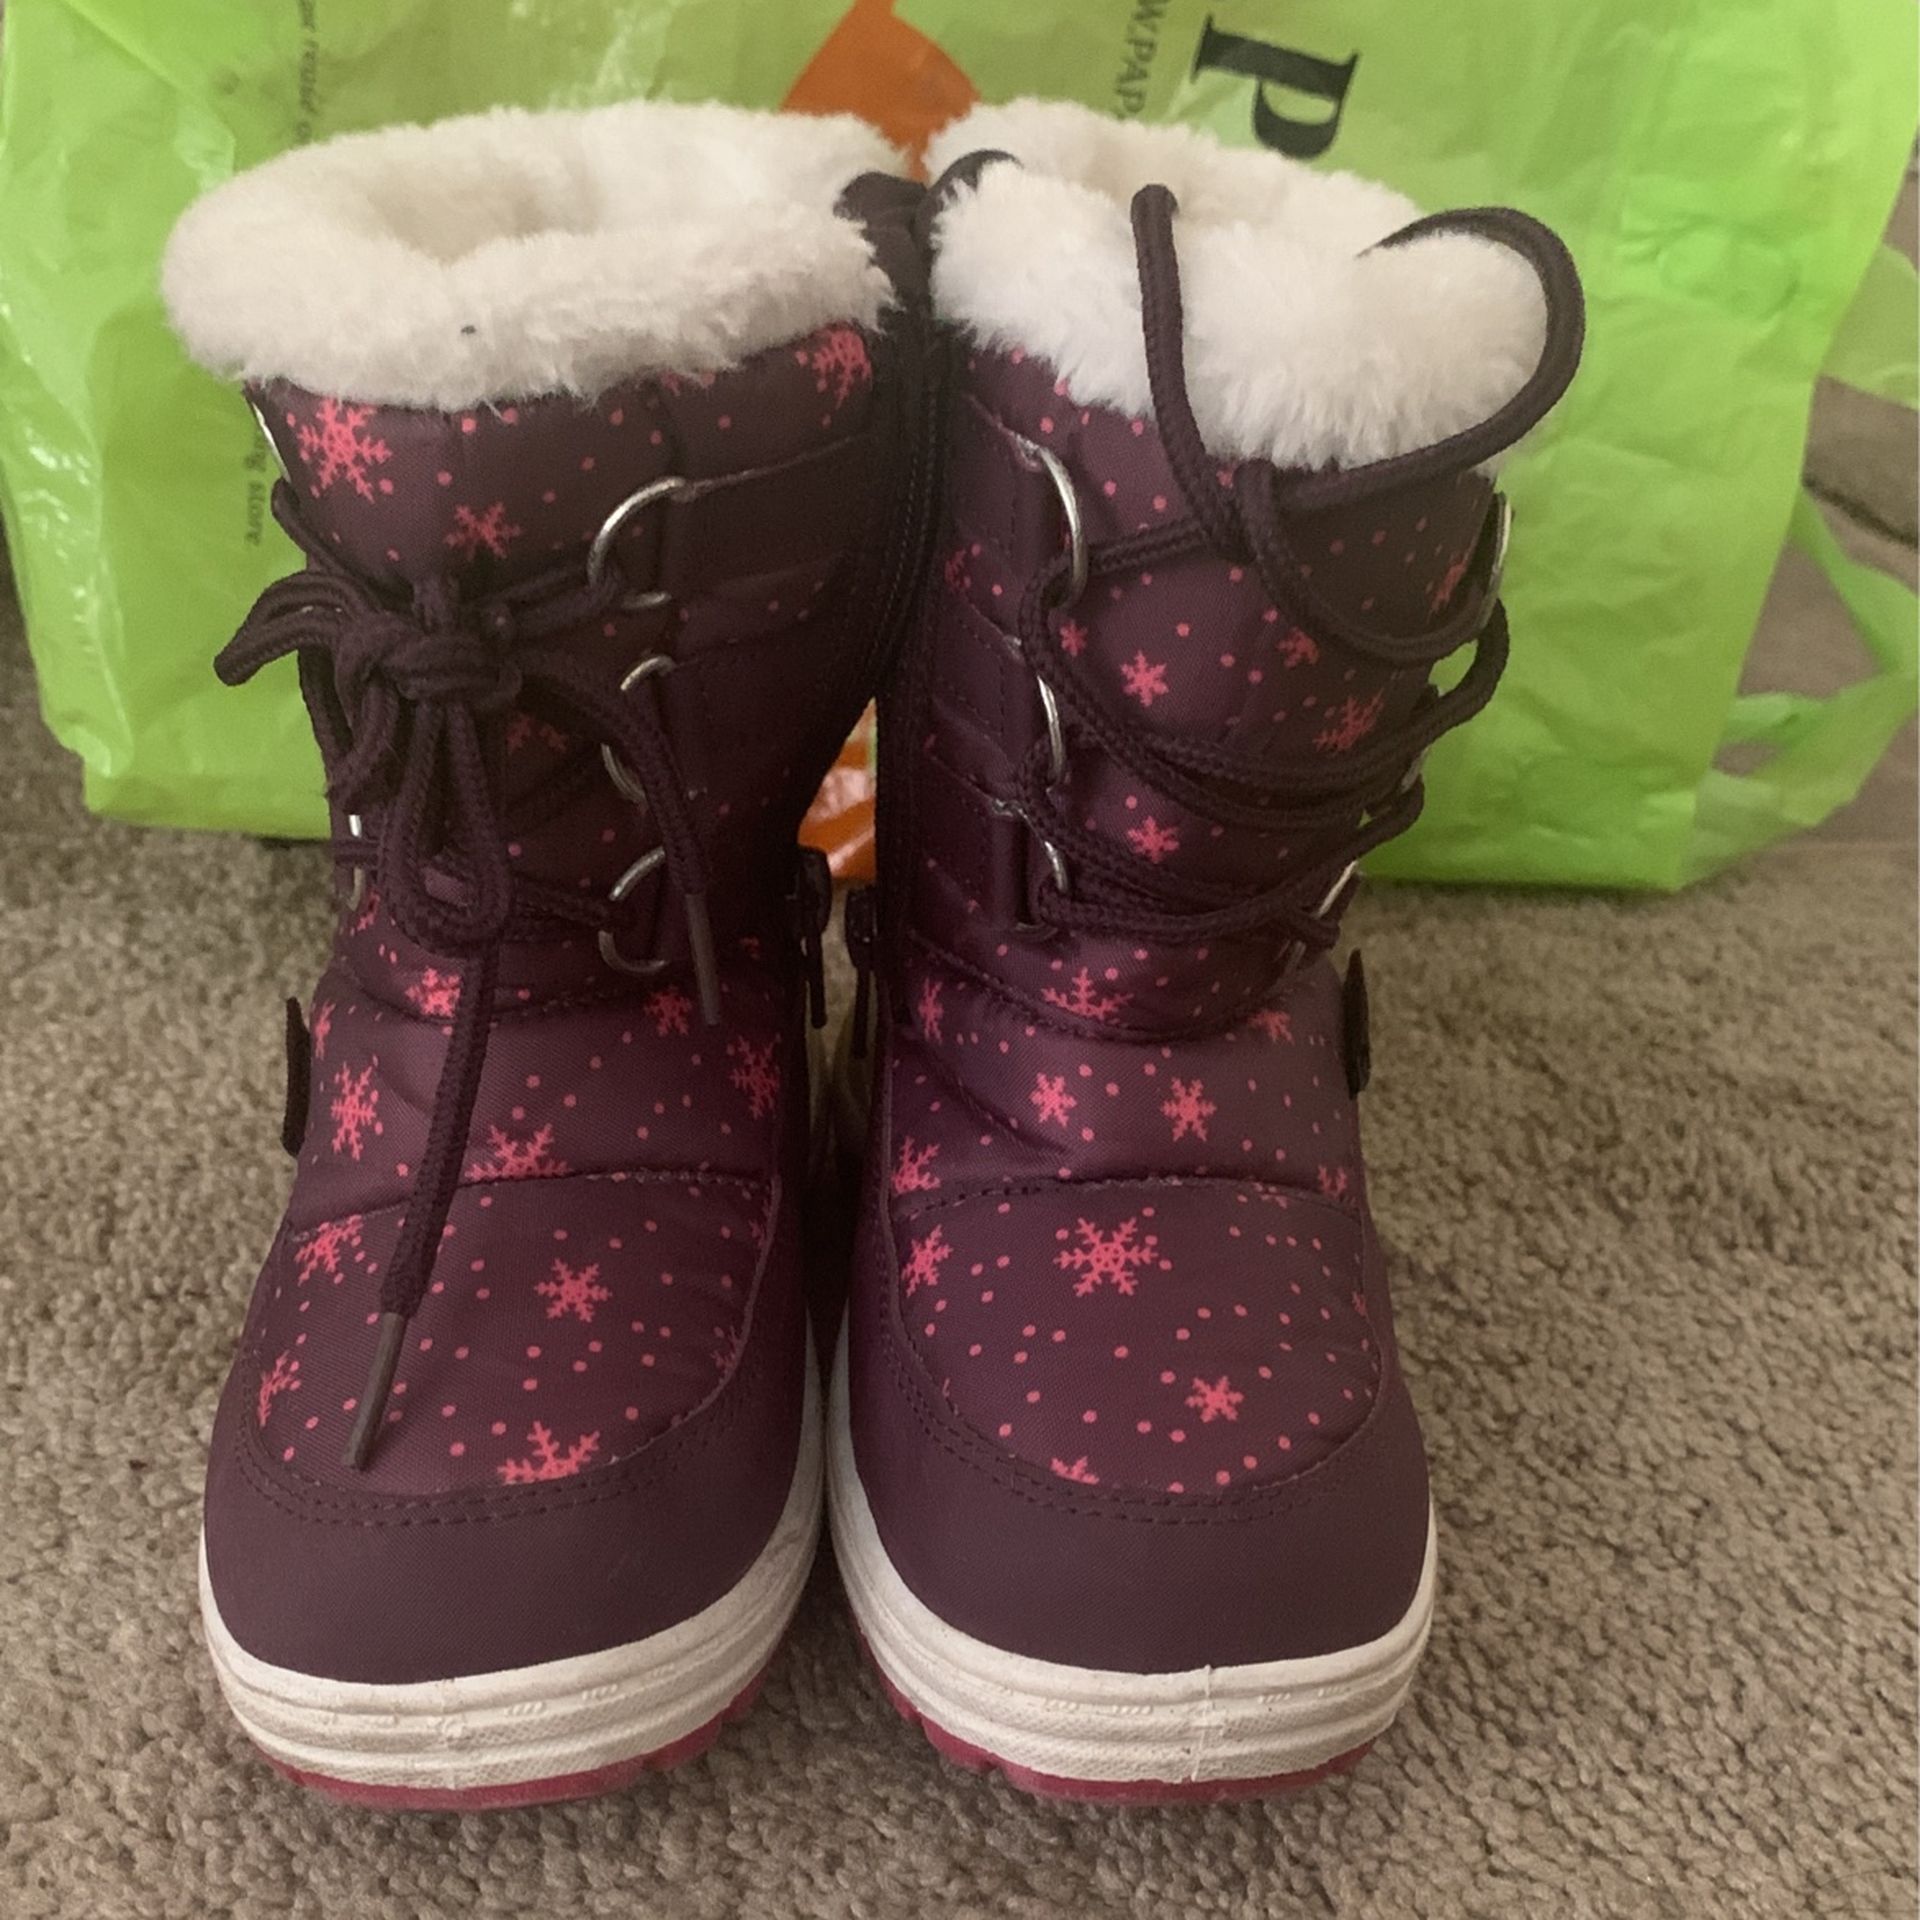 Toddler Girl Snow Boots - Size 8 